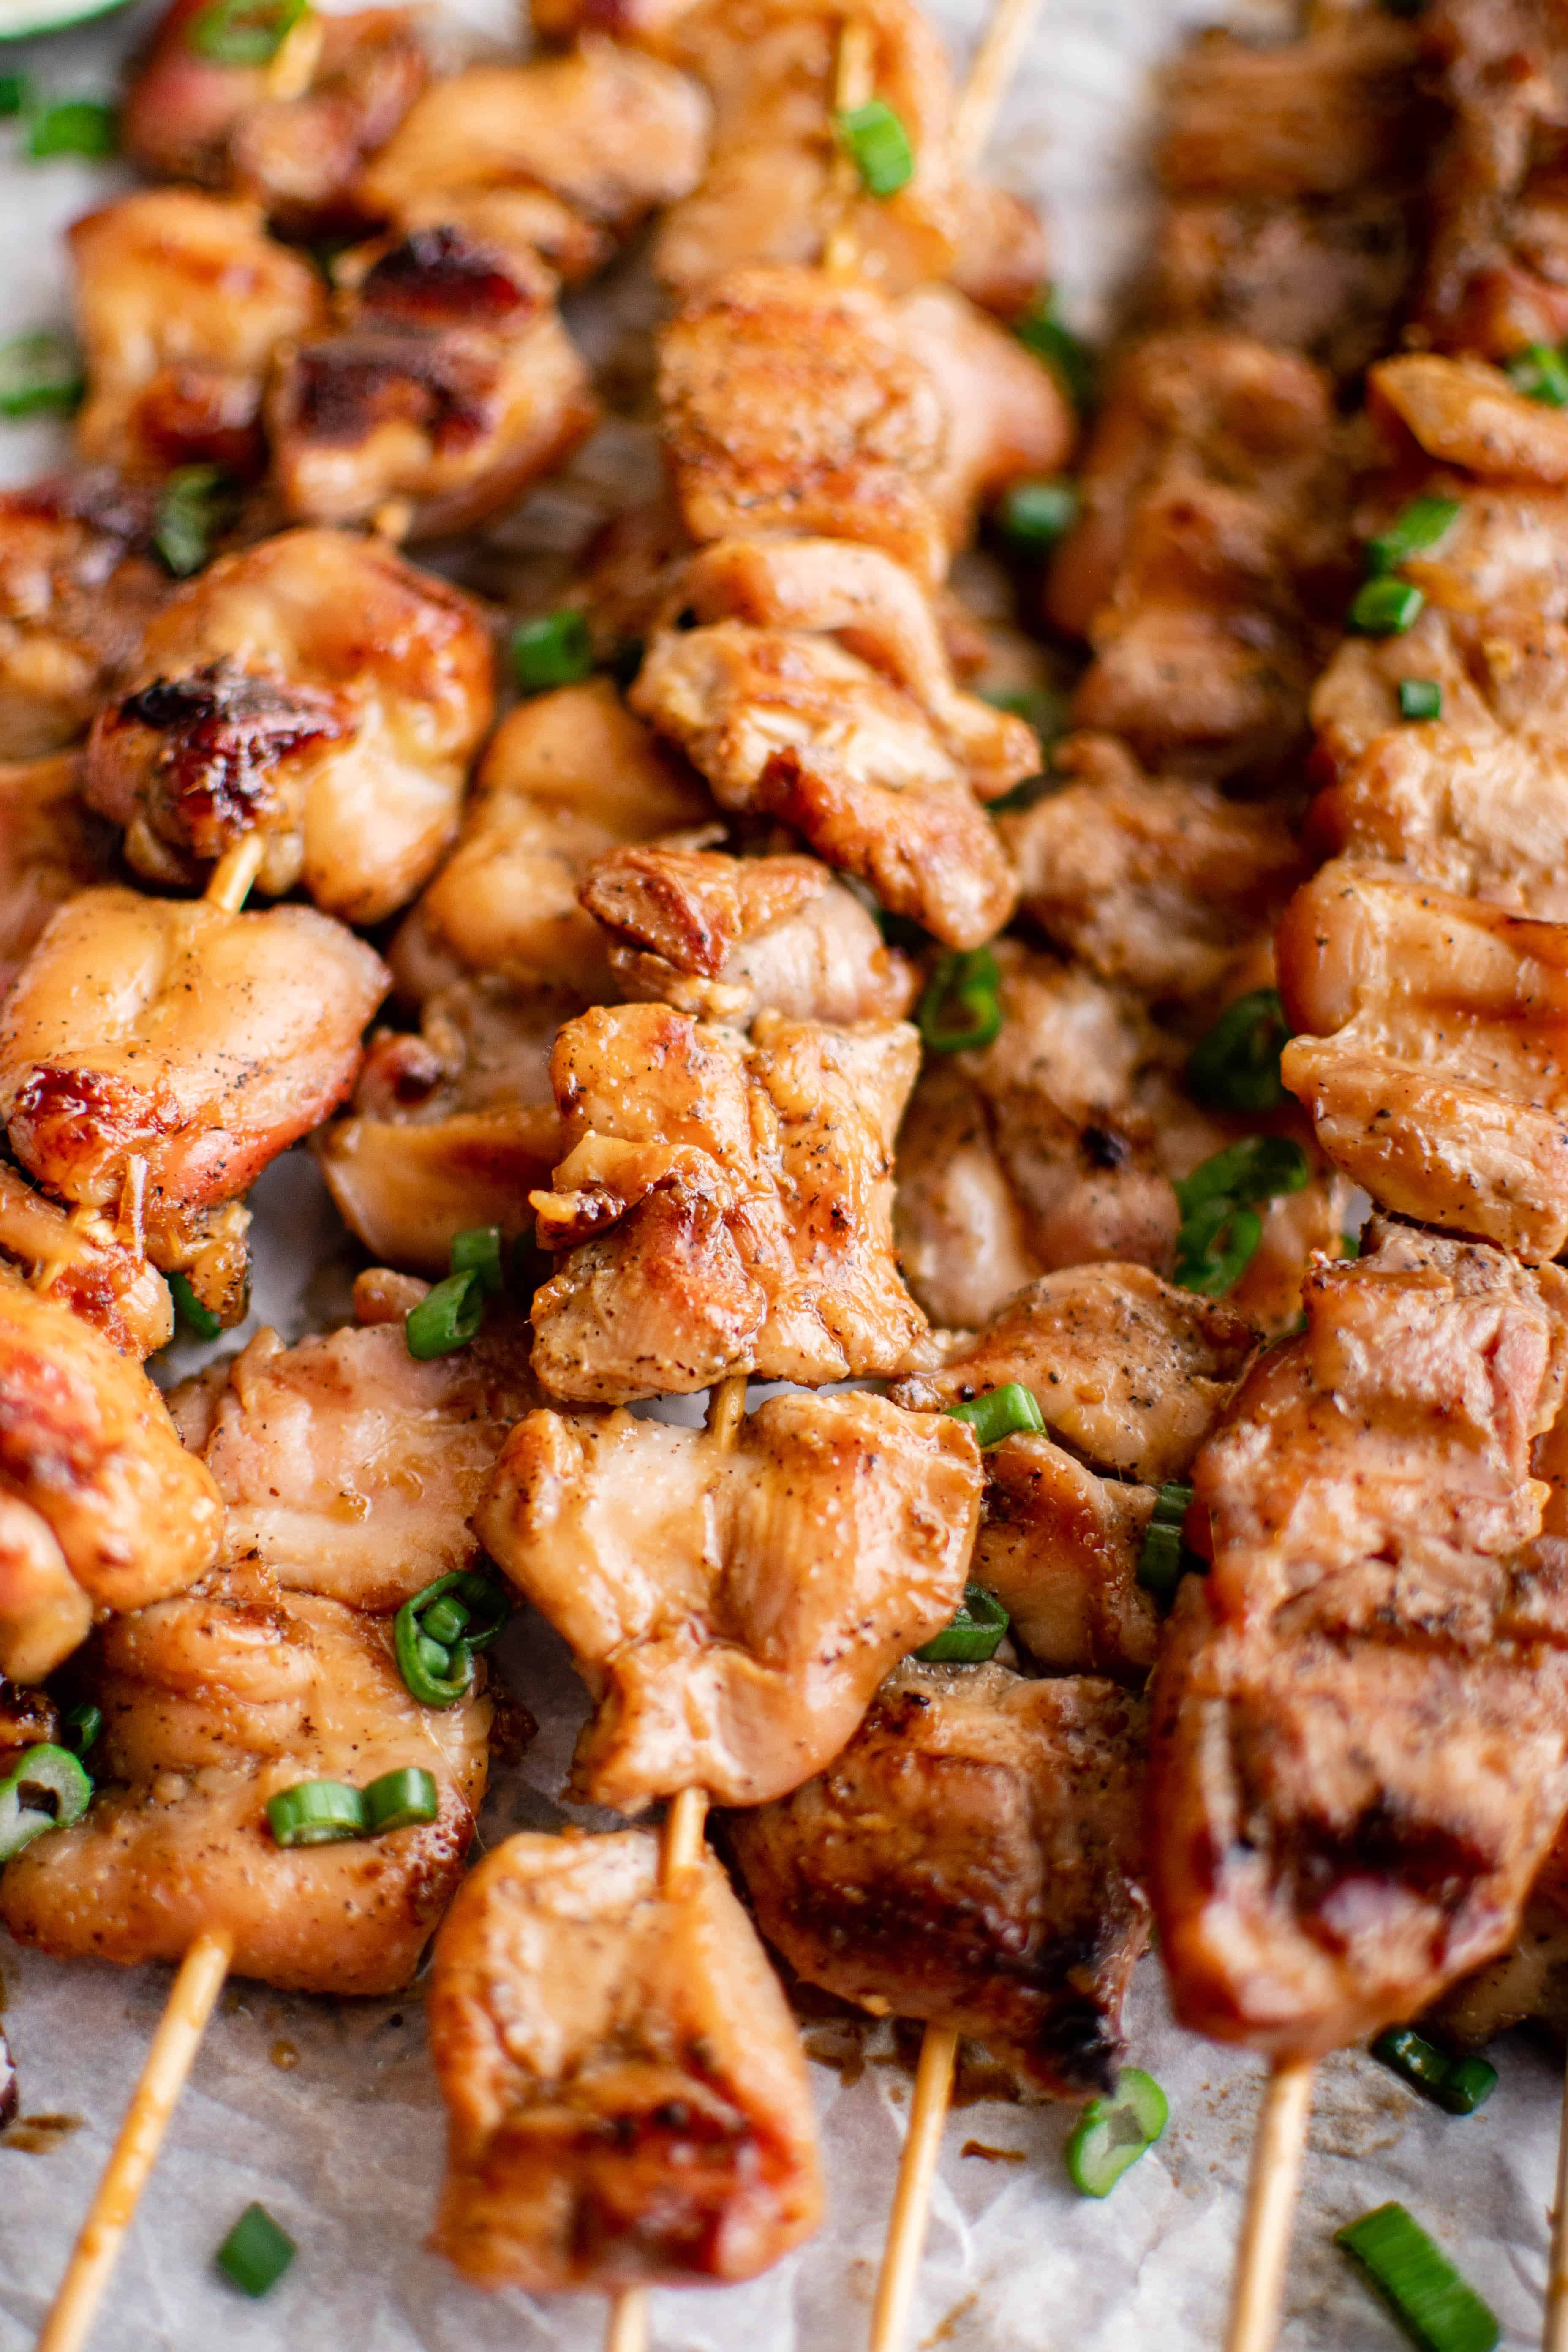 stack of cooked chicken Yakitori skewers garnished with sliced green onions.